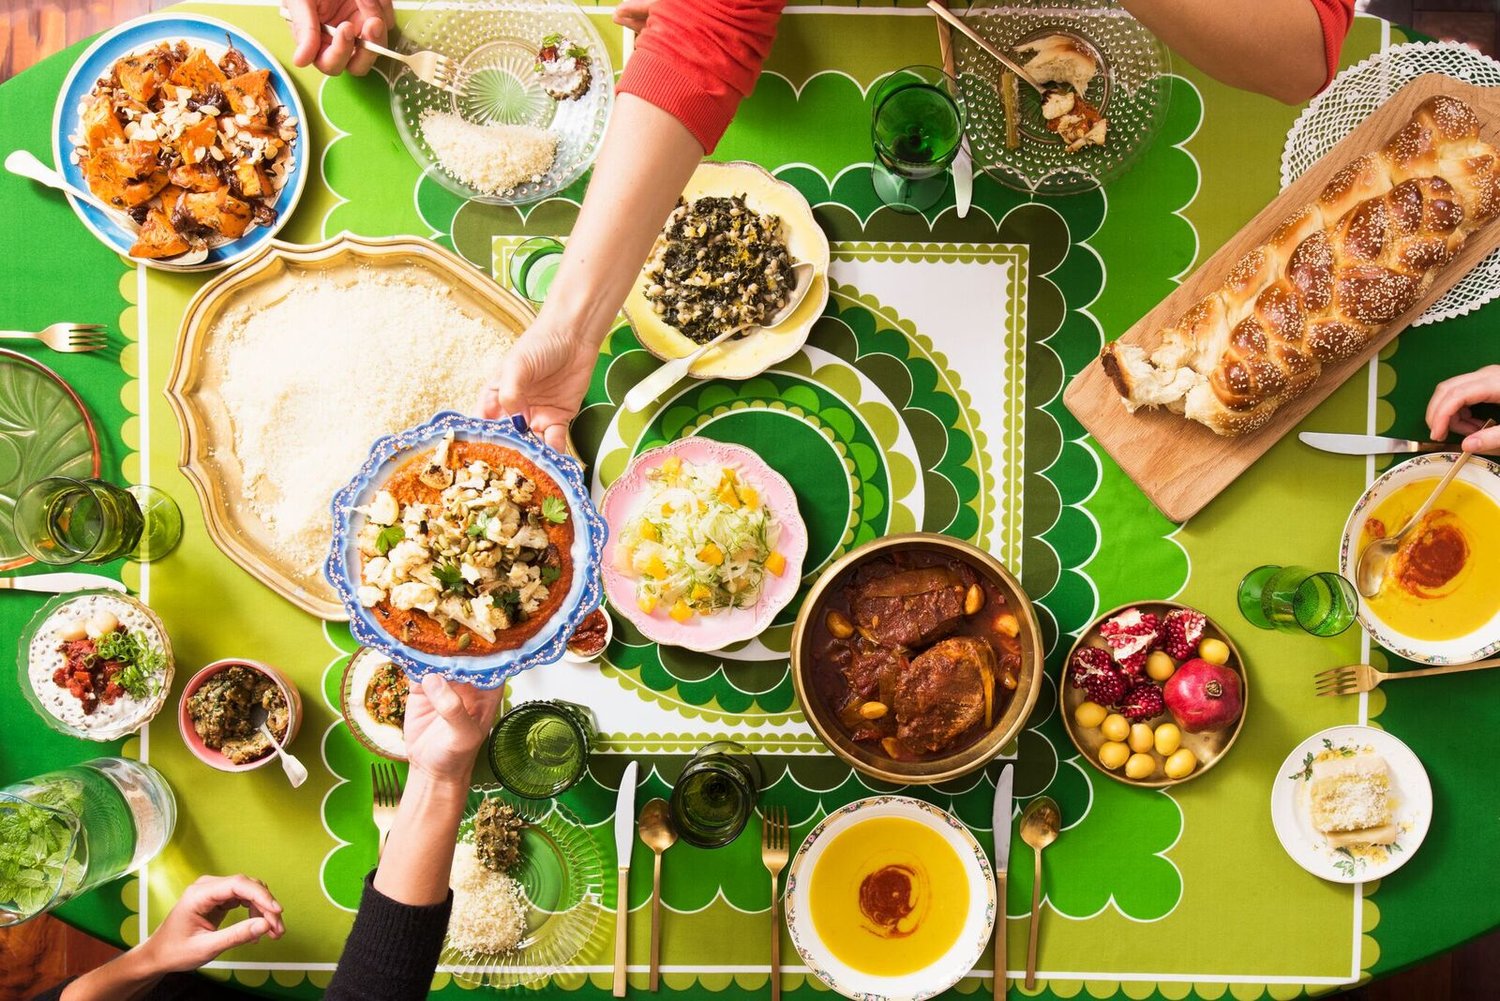 Sukkot spread including challah, fava bean soup, couscous and more on green tablecloth